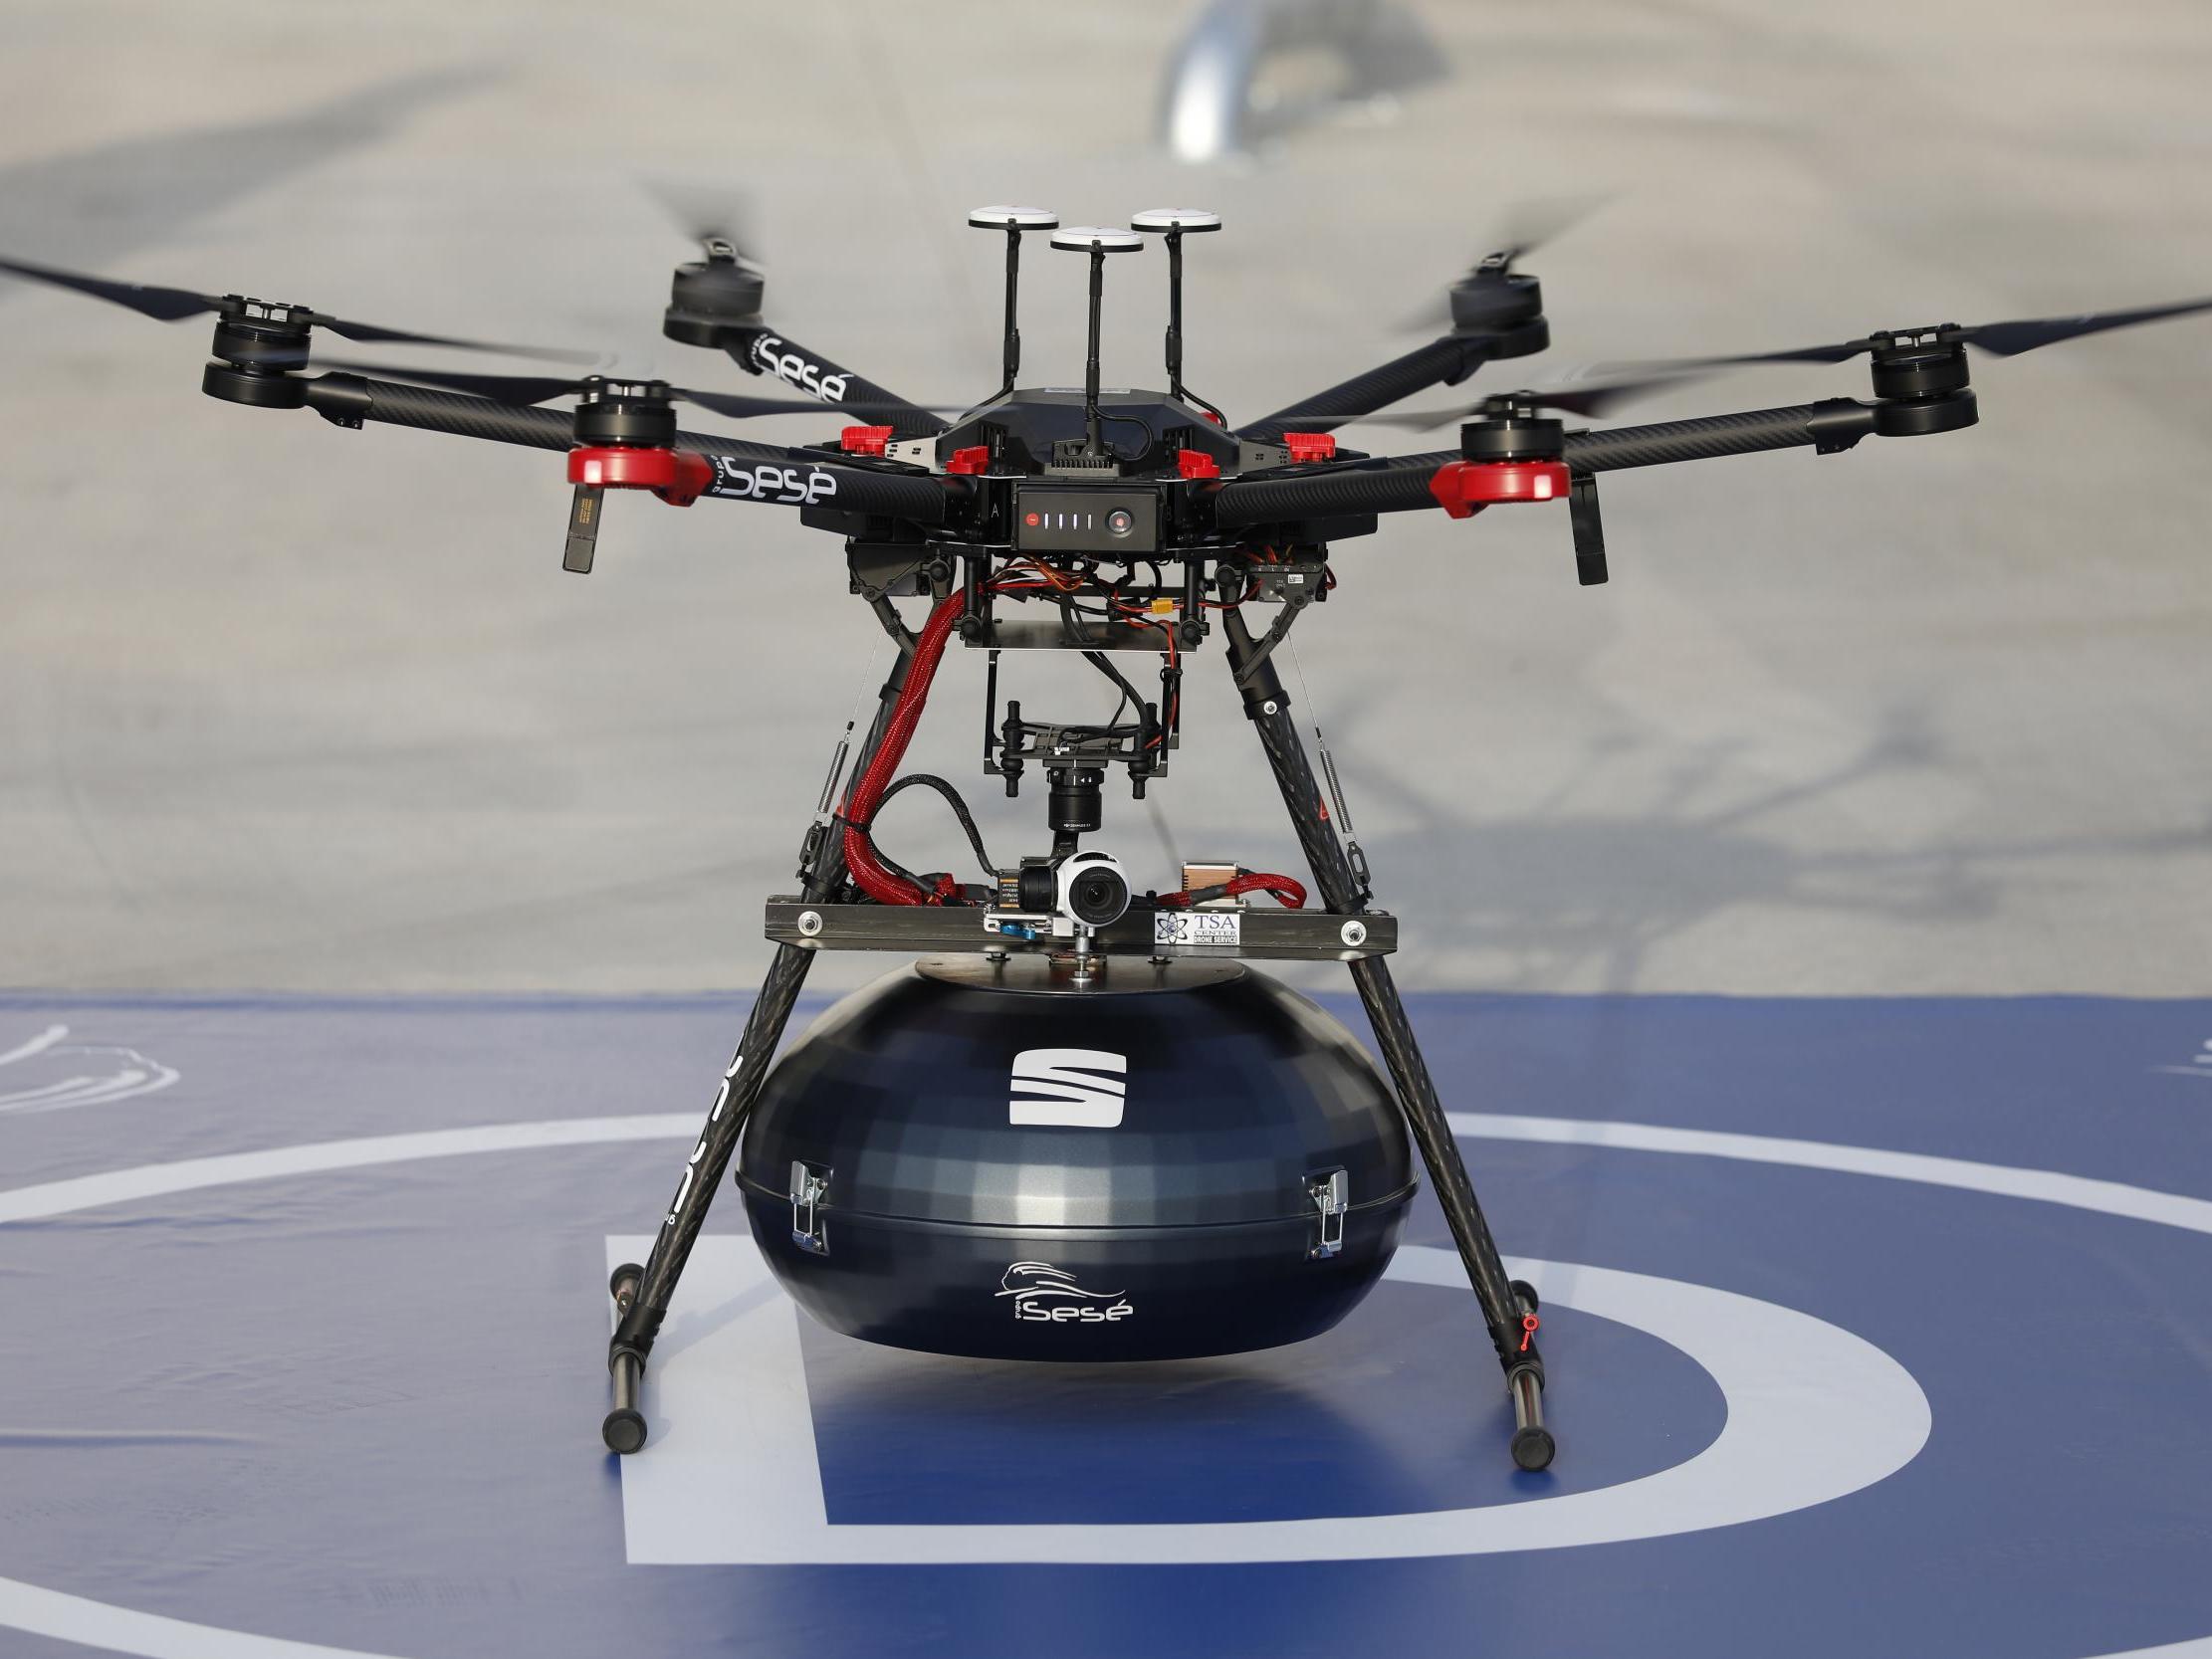 Drones are being used to speed up logistical processes